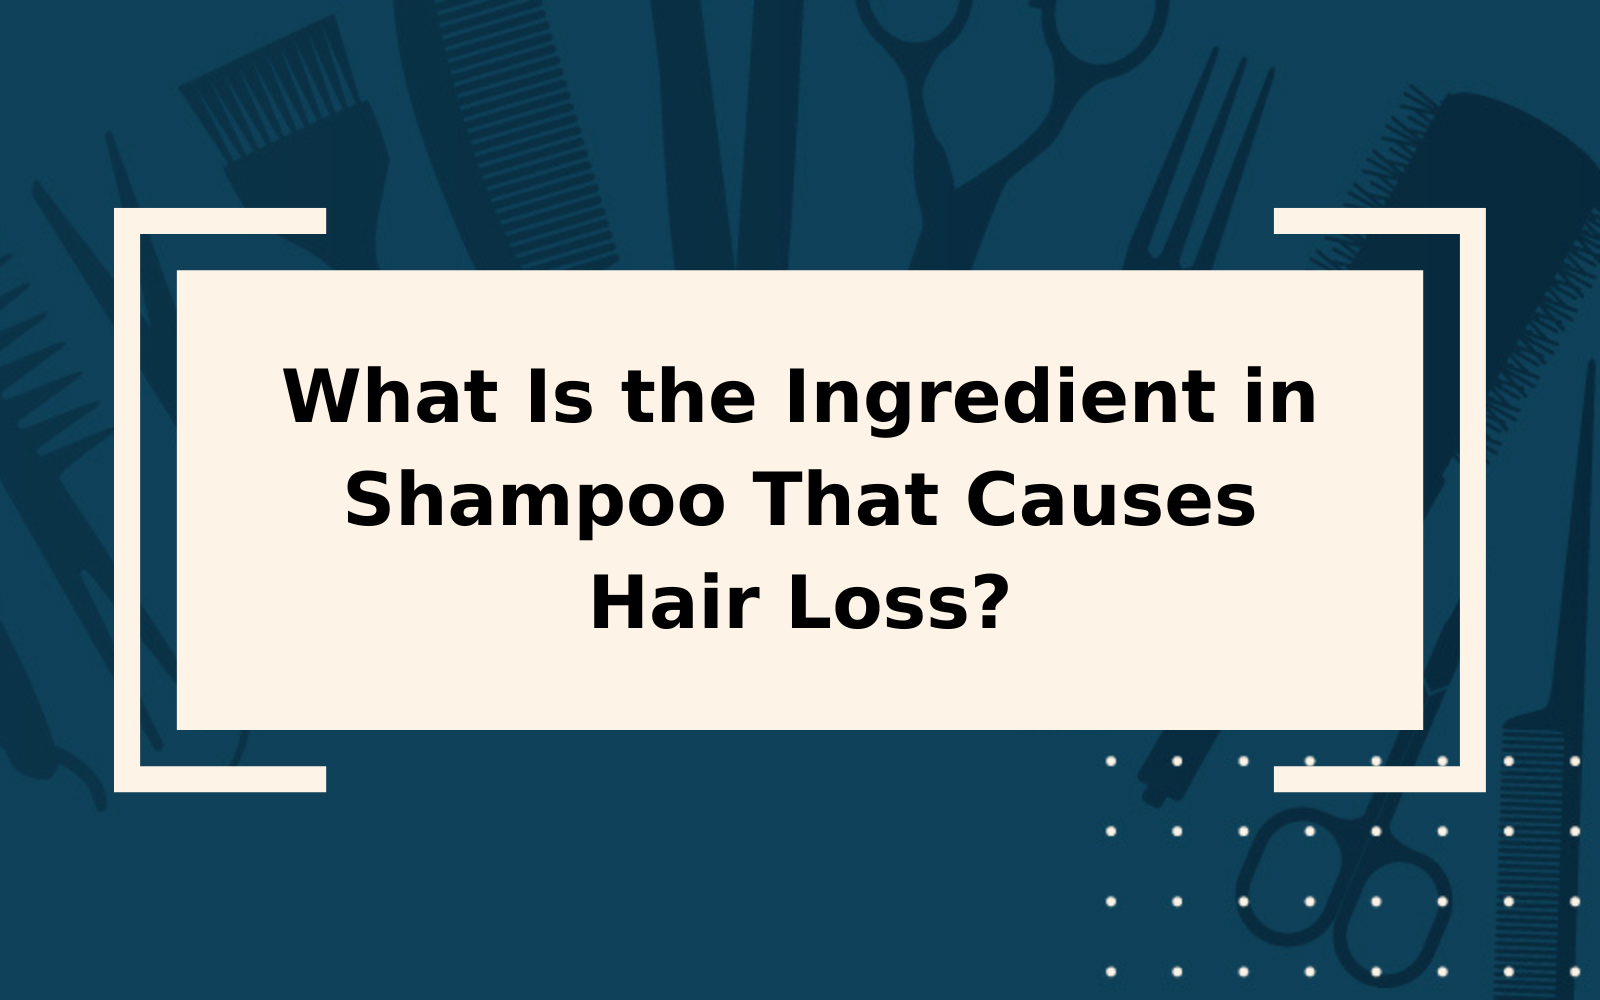 What Is the Ingredient in Shampoo That Causes Hair Loss?